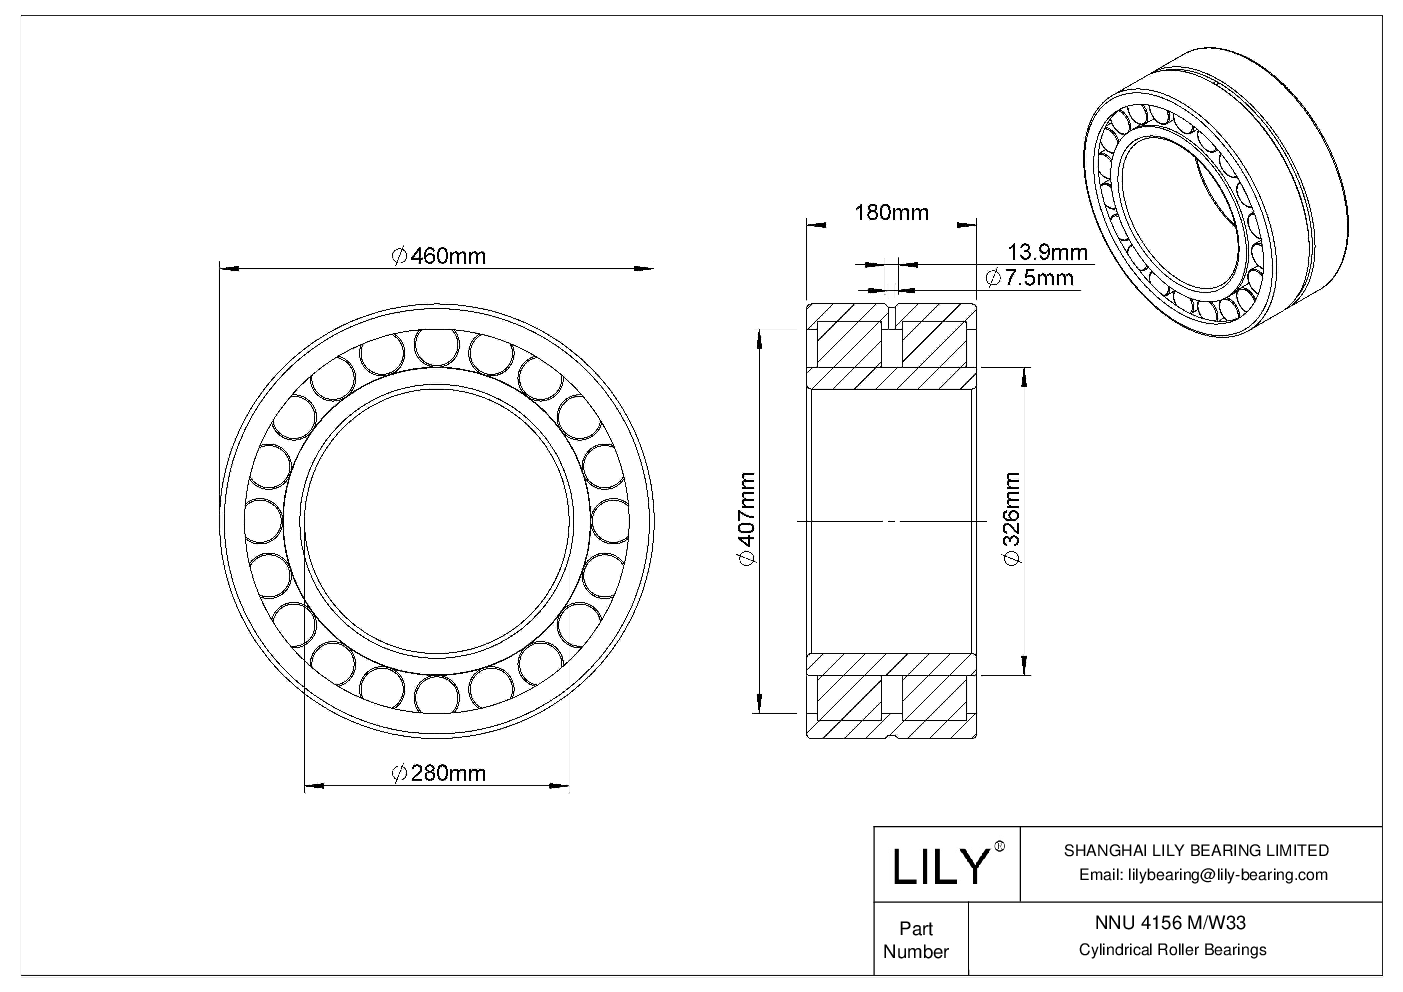 NNU 4156 M/W33 Double Row Cylindrical Roller Bearings cad drawing